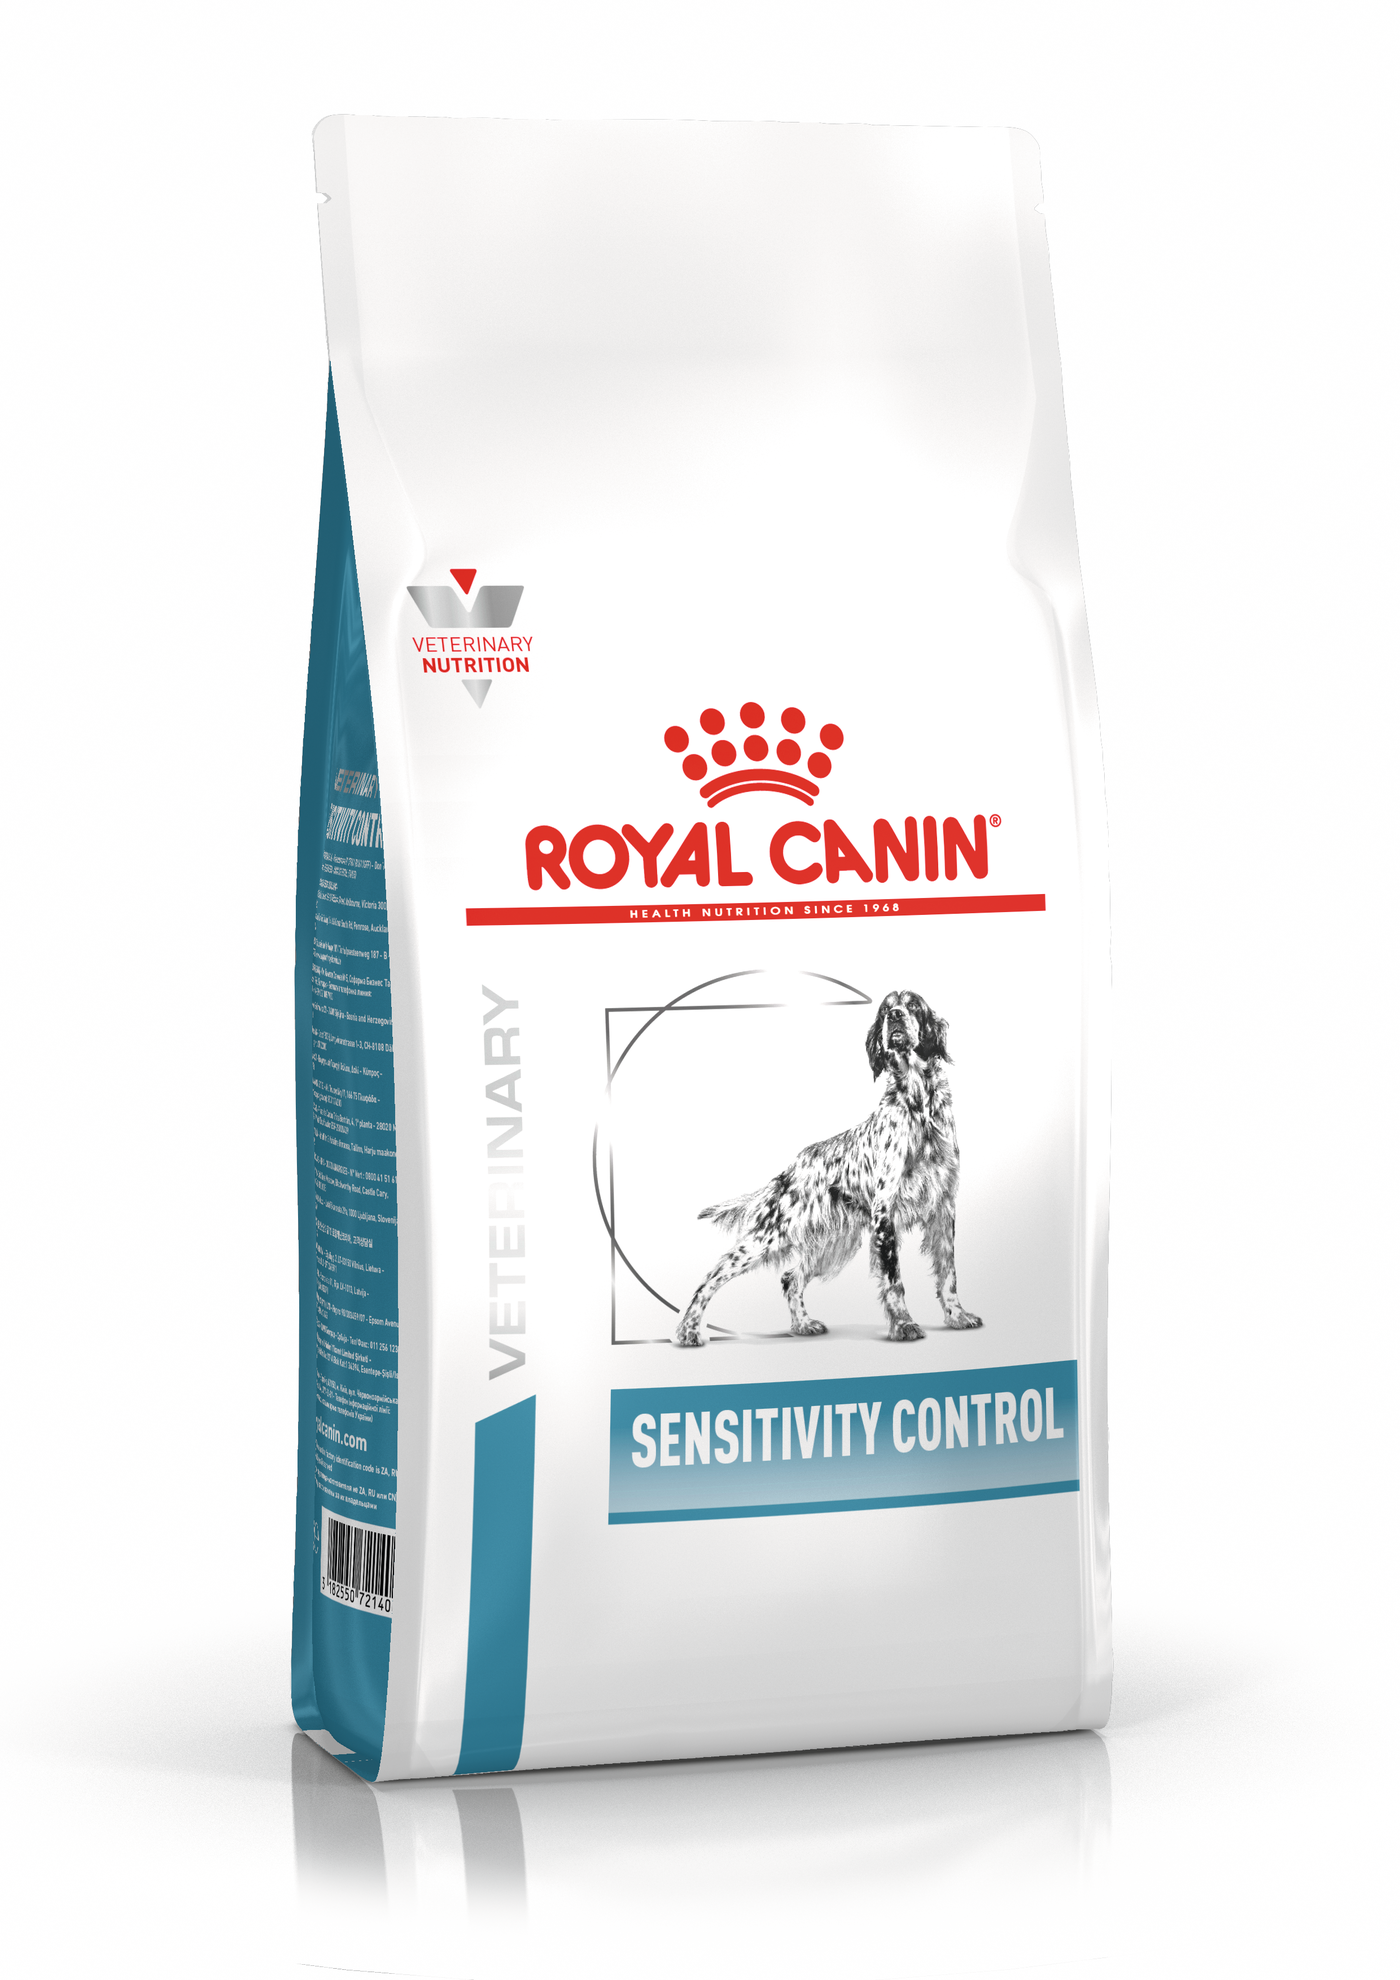 Grondig Politie nicotine Royal Canin Sensitivity Control Cat Top Sellers, SAVE 59%.